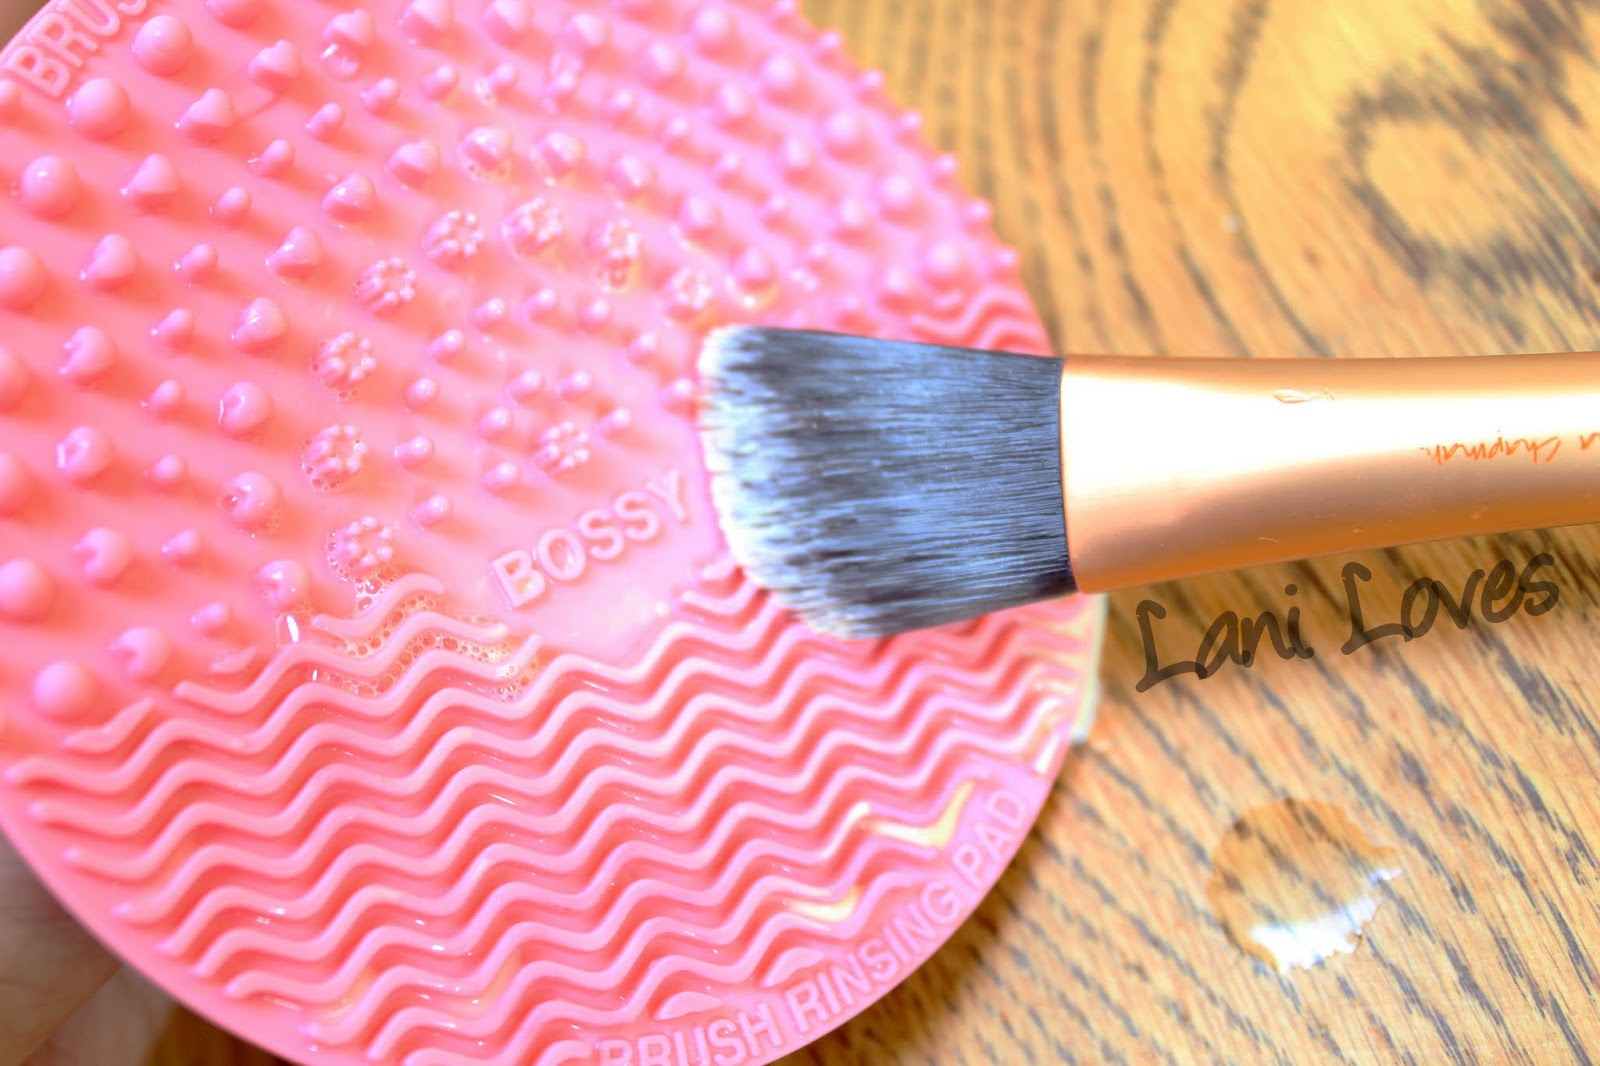 Brush Cleaning 101 with Bossy Cosmetics